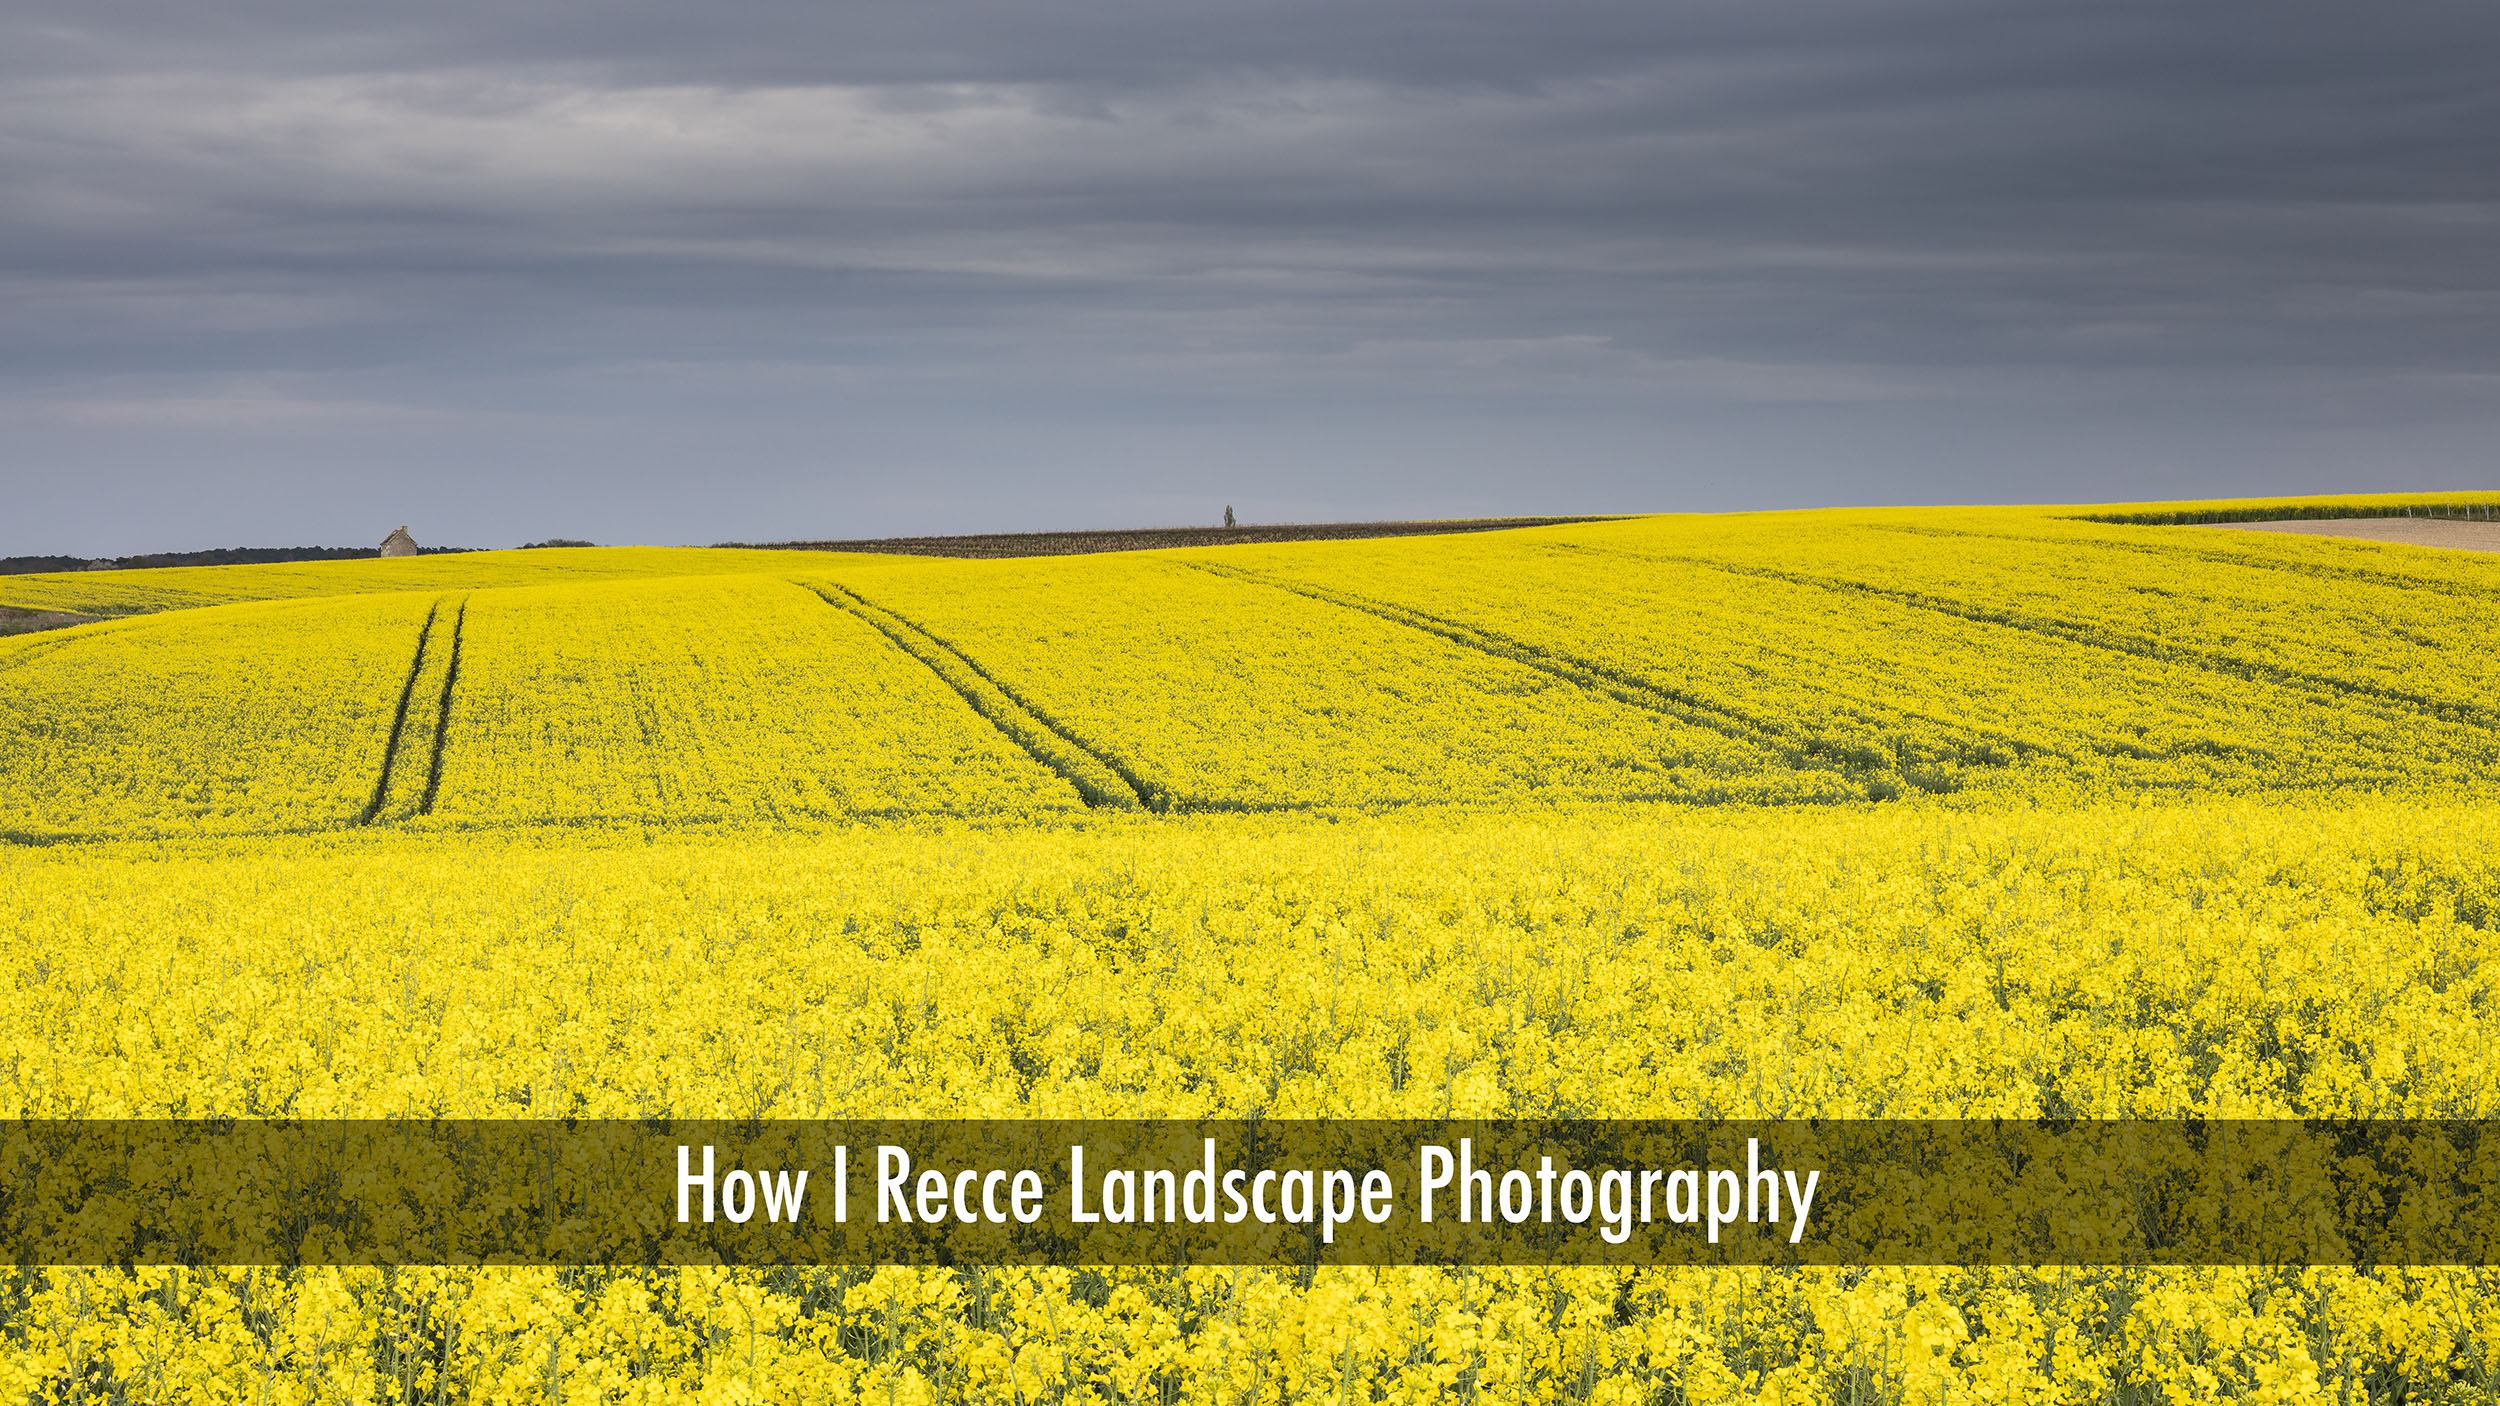 How I recce landscape photography